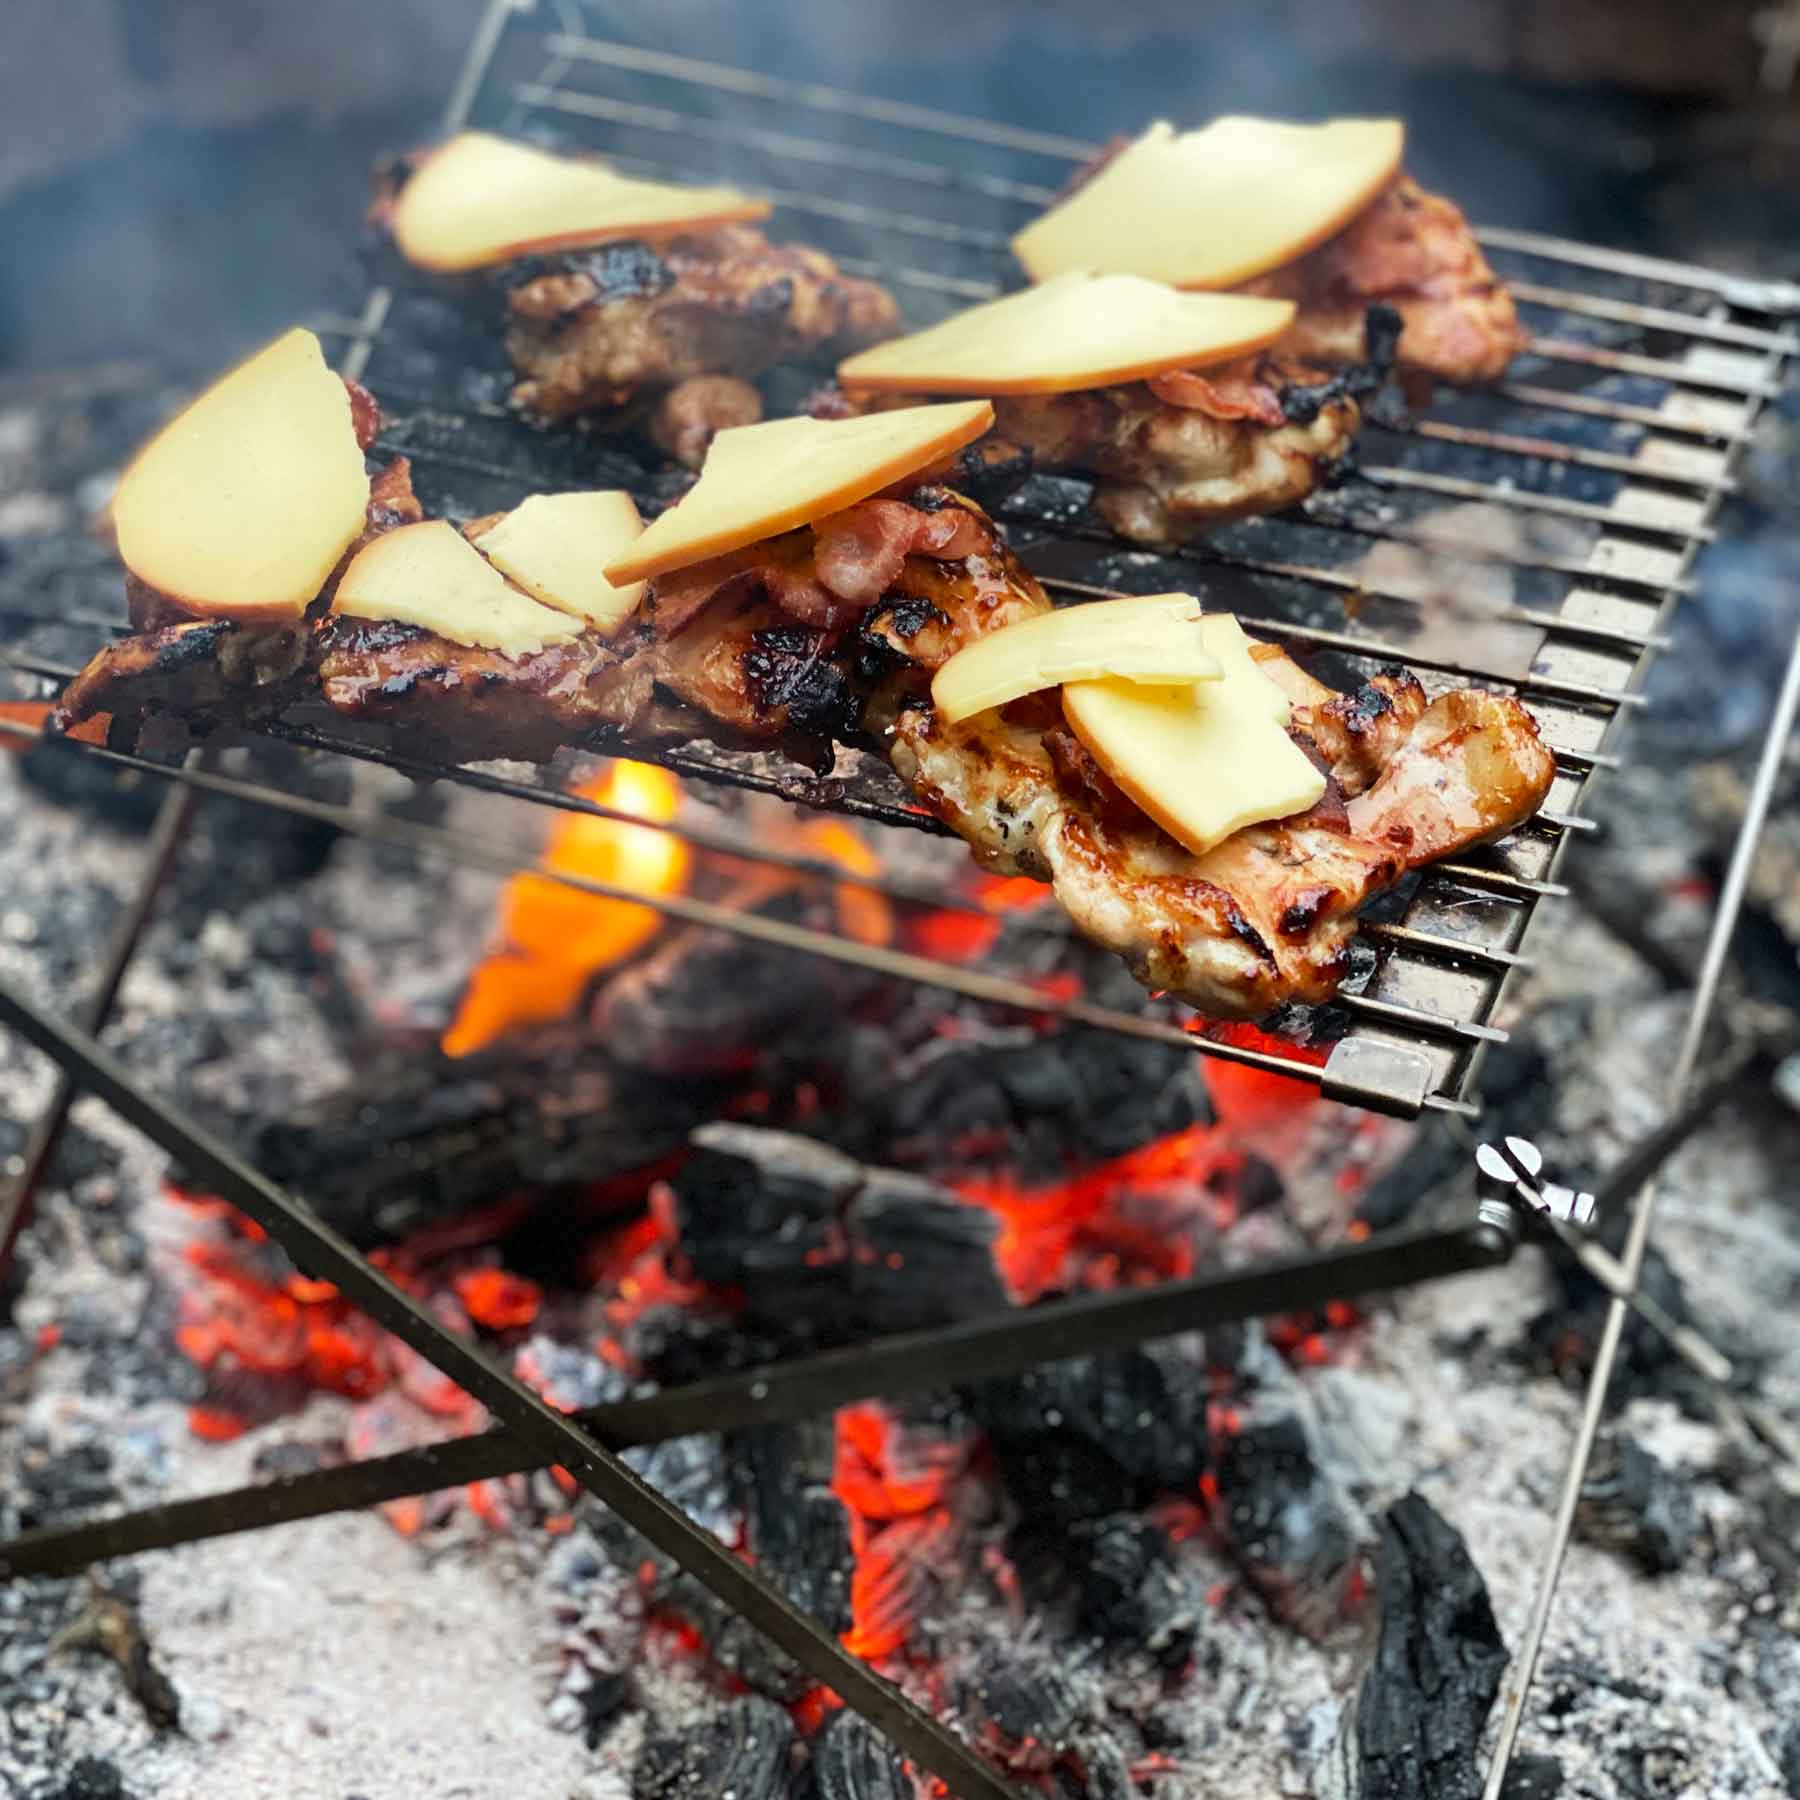 Cooking over the campfire after paragliding